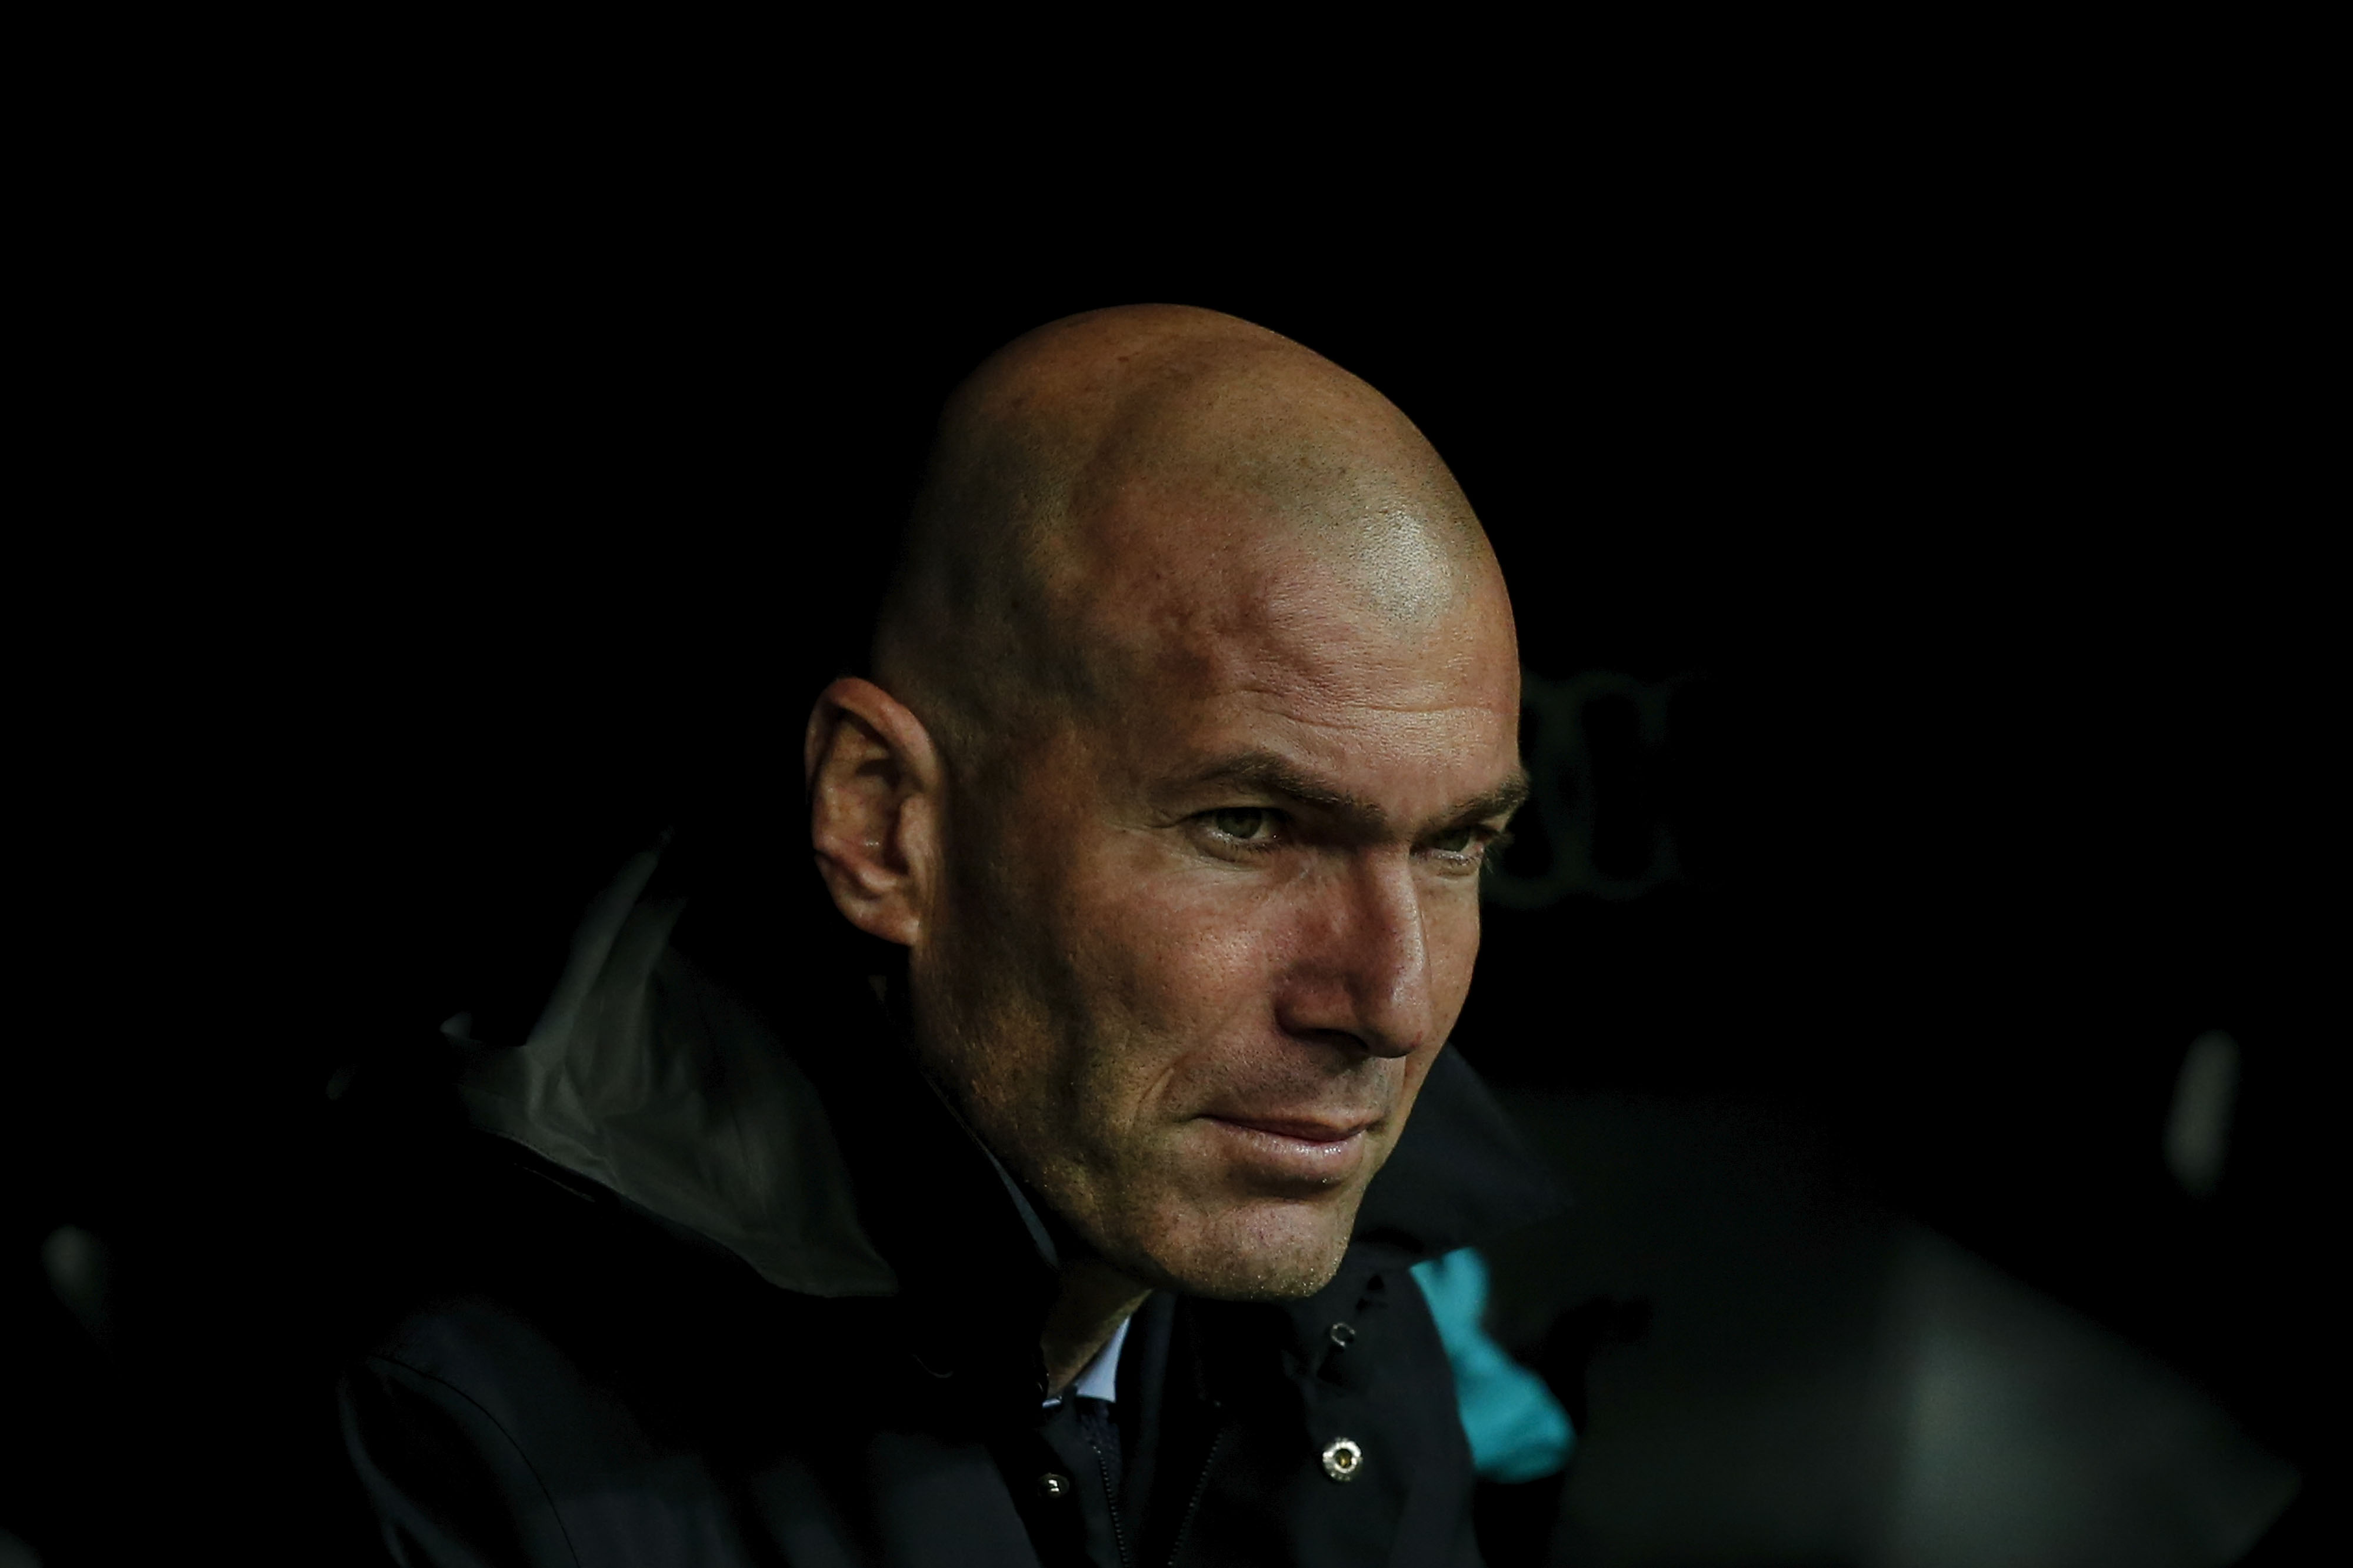 MADRID, SPAIN - MARCH 03: Head coach Zinedine Zidane of Real Madrid CF looks on from the bench prior to start the La Liga match between Real Madrid CF and Getafe CF at Estadio Santiago Bernabeu on March 3, 2018 in Madrid, Spain. (Photo by Gonzalo Arroyo Moreno/Getty Images)